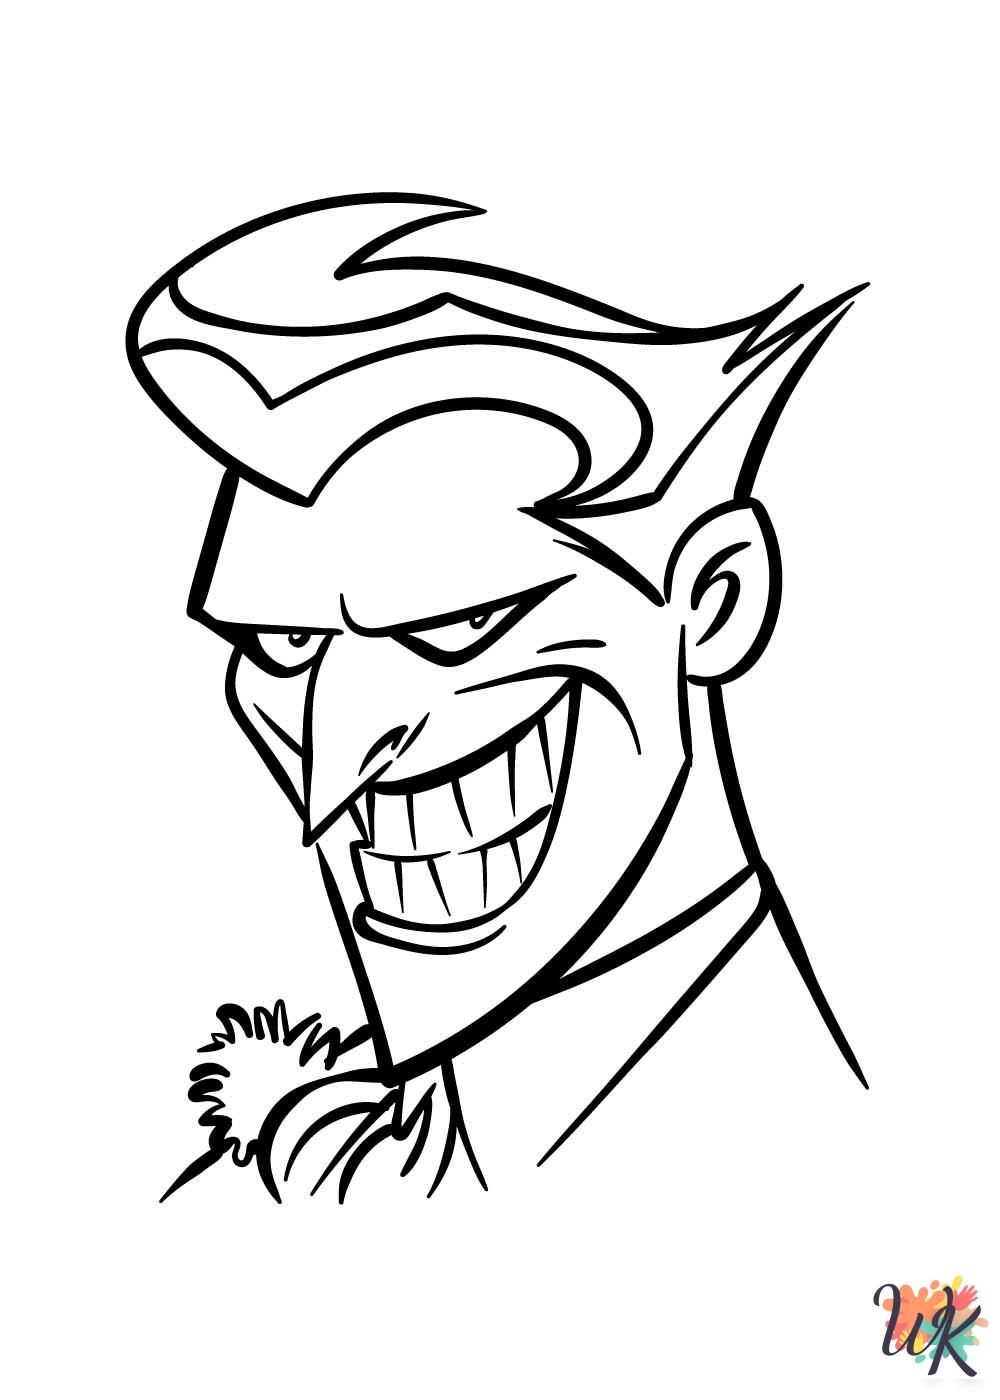 Joker coloring pages for kids